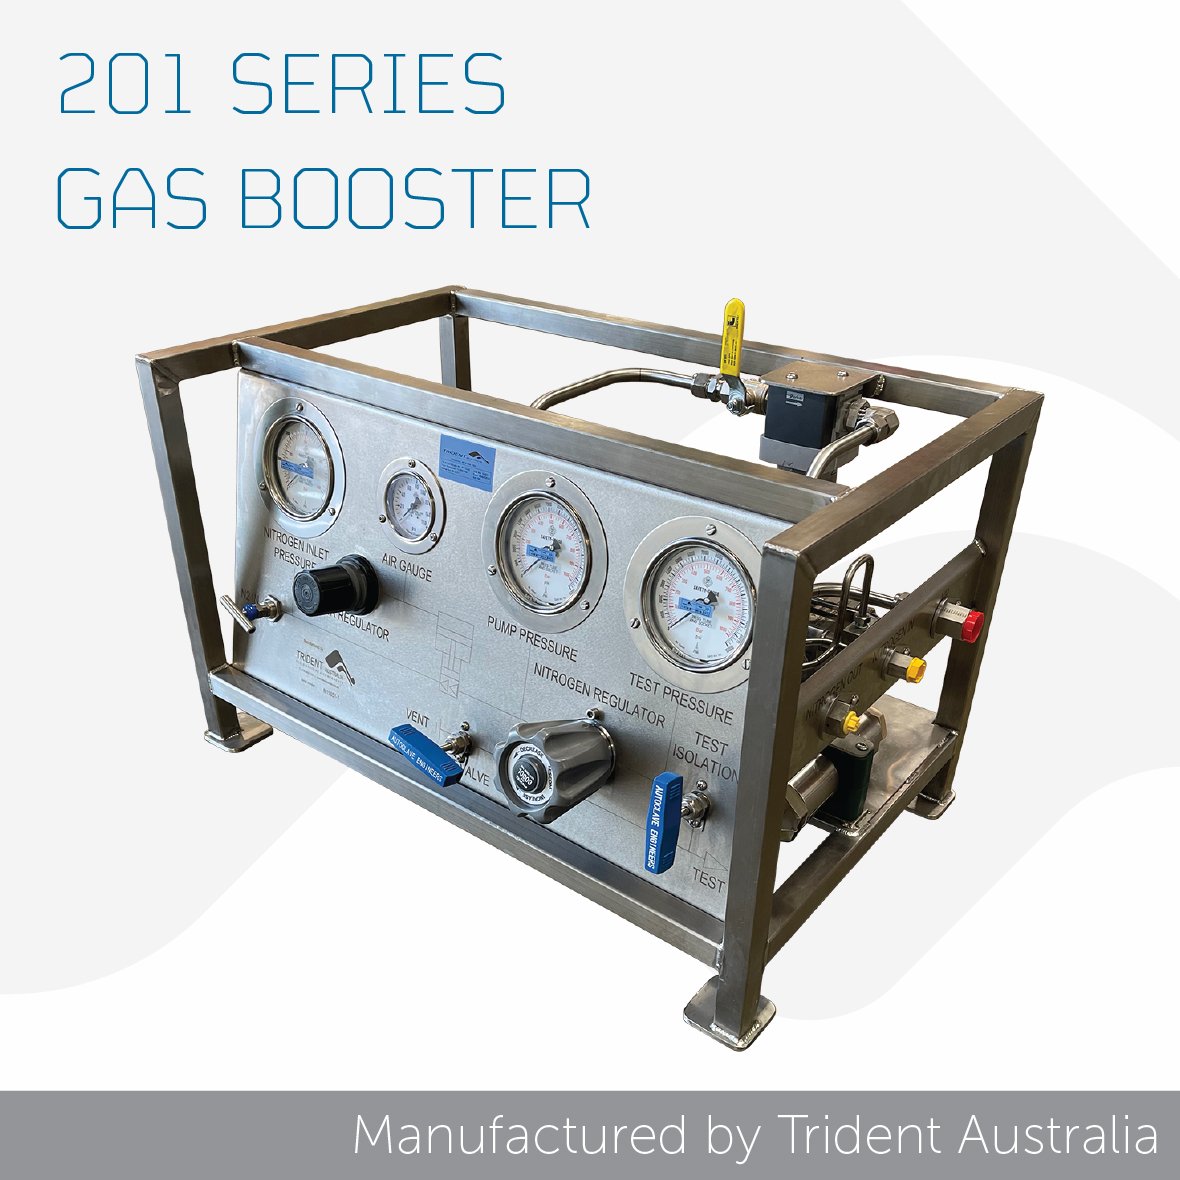 Trident 201 Series Gas Boosters